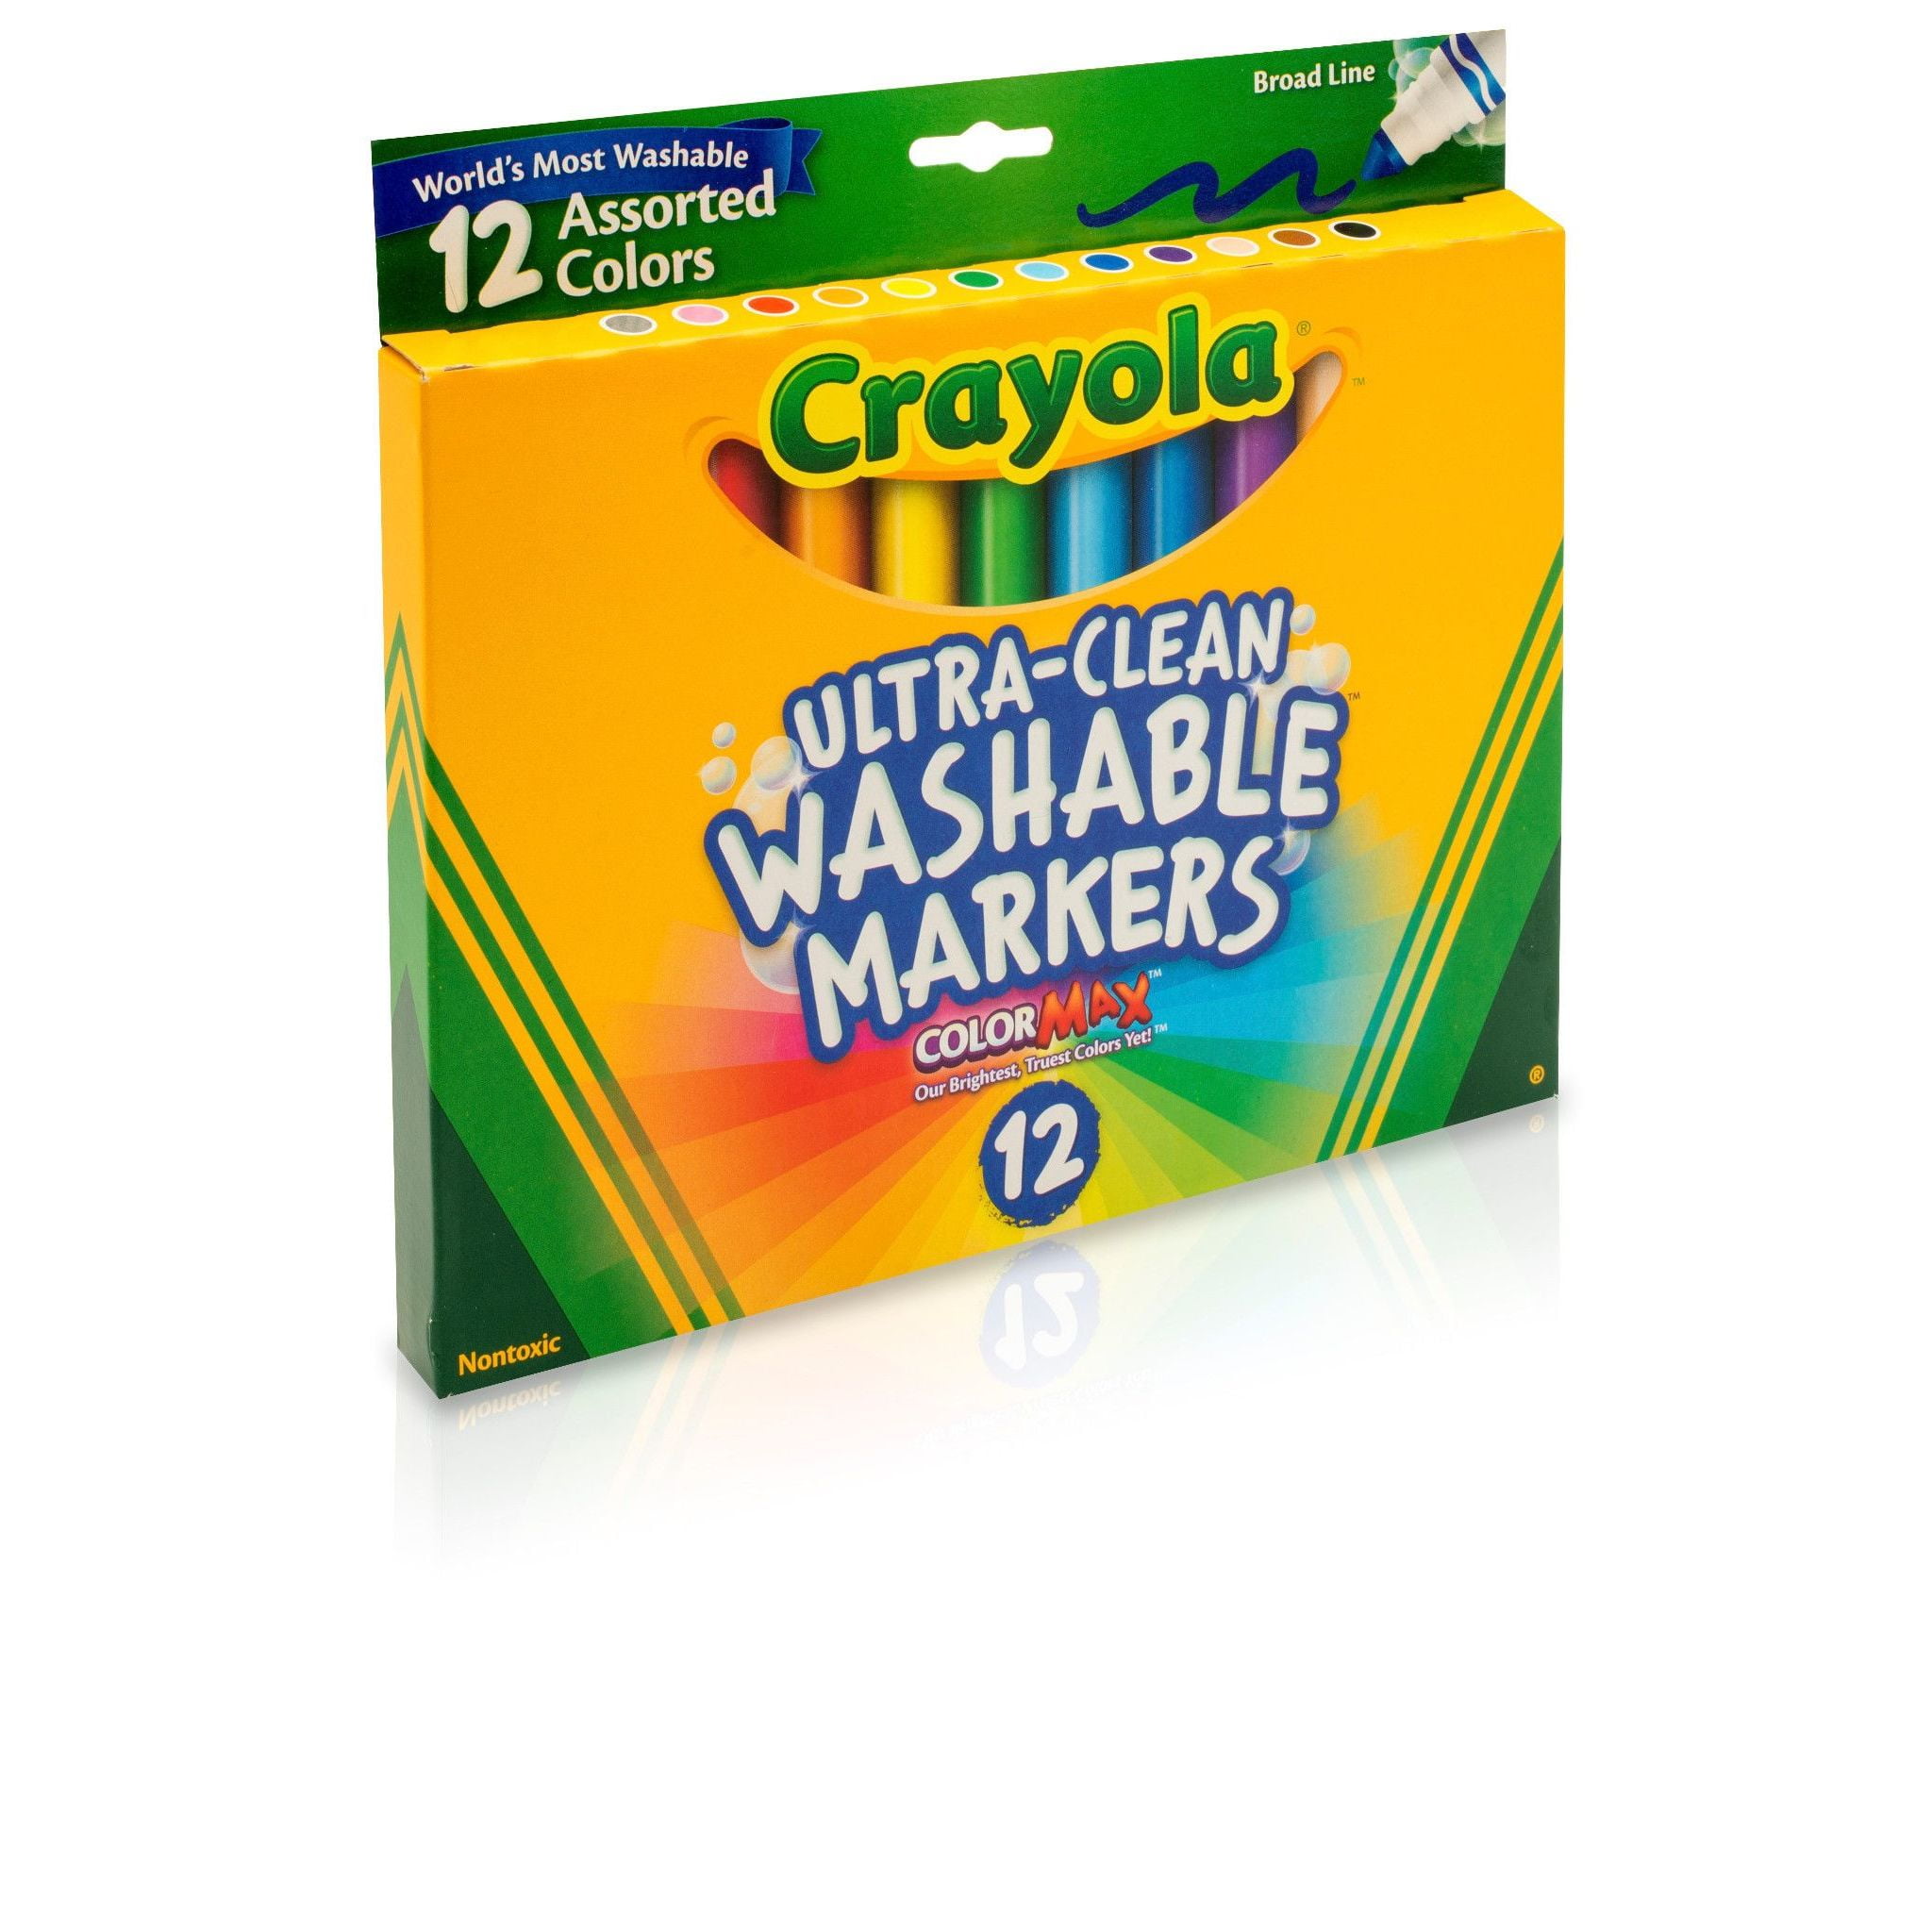 Rarlan Washable Markers for Kids 12 Colors